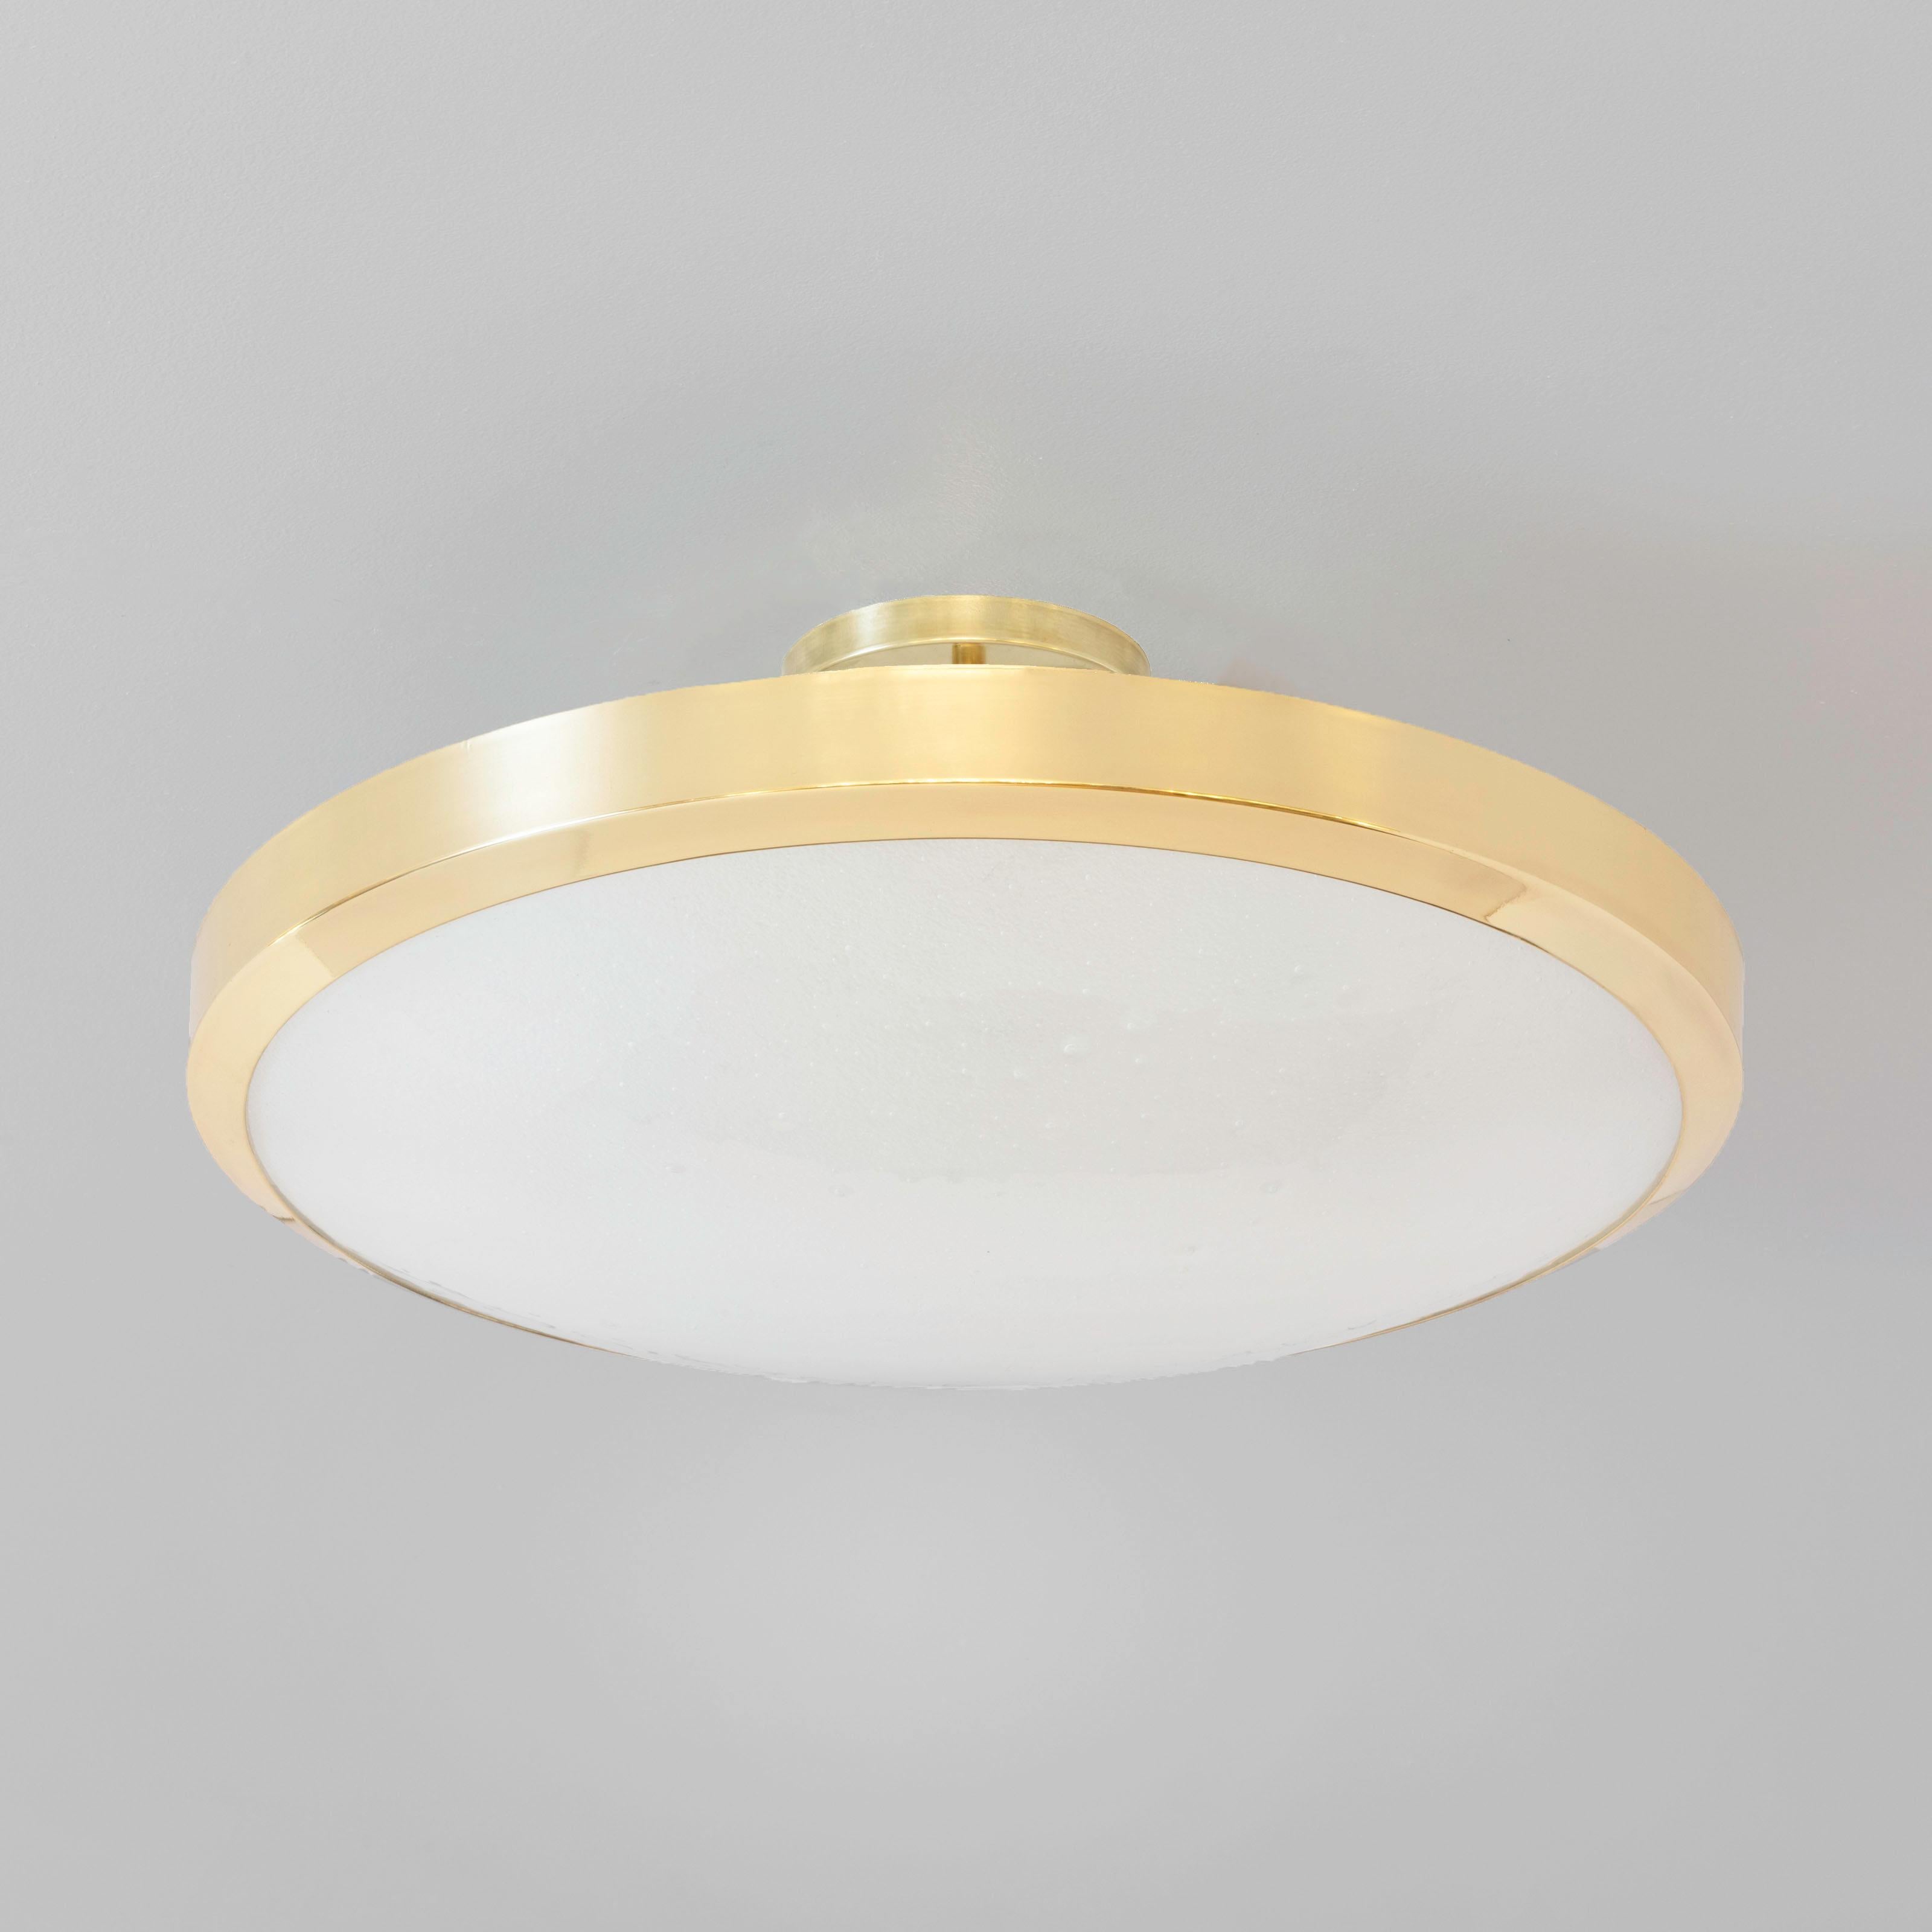 The Uno Grande ceiling light is the largest member of Uno family.  It exemplifies simple elegance via its clean profile designed around a single Murano glass shade. Shown in polished brass with our signature Murano bubble glass.  See the Uno